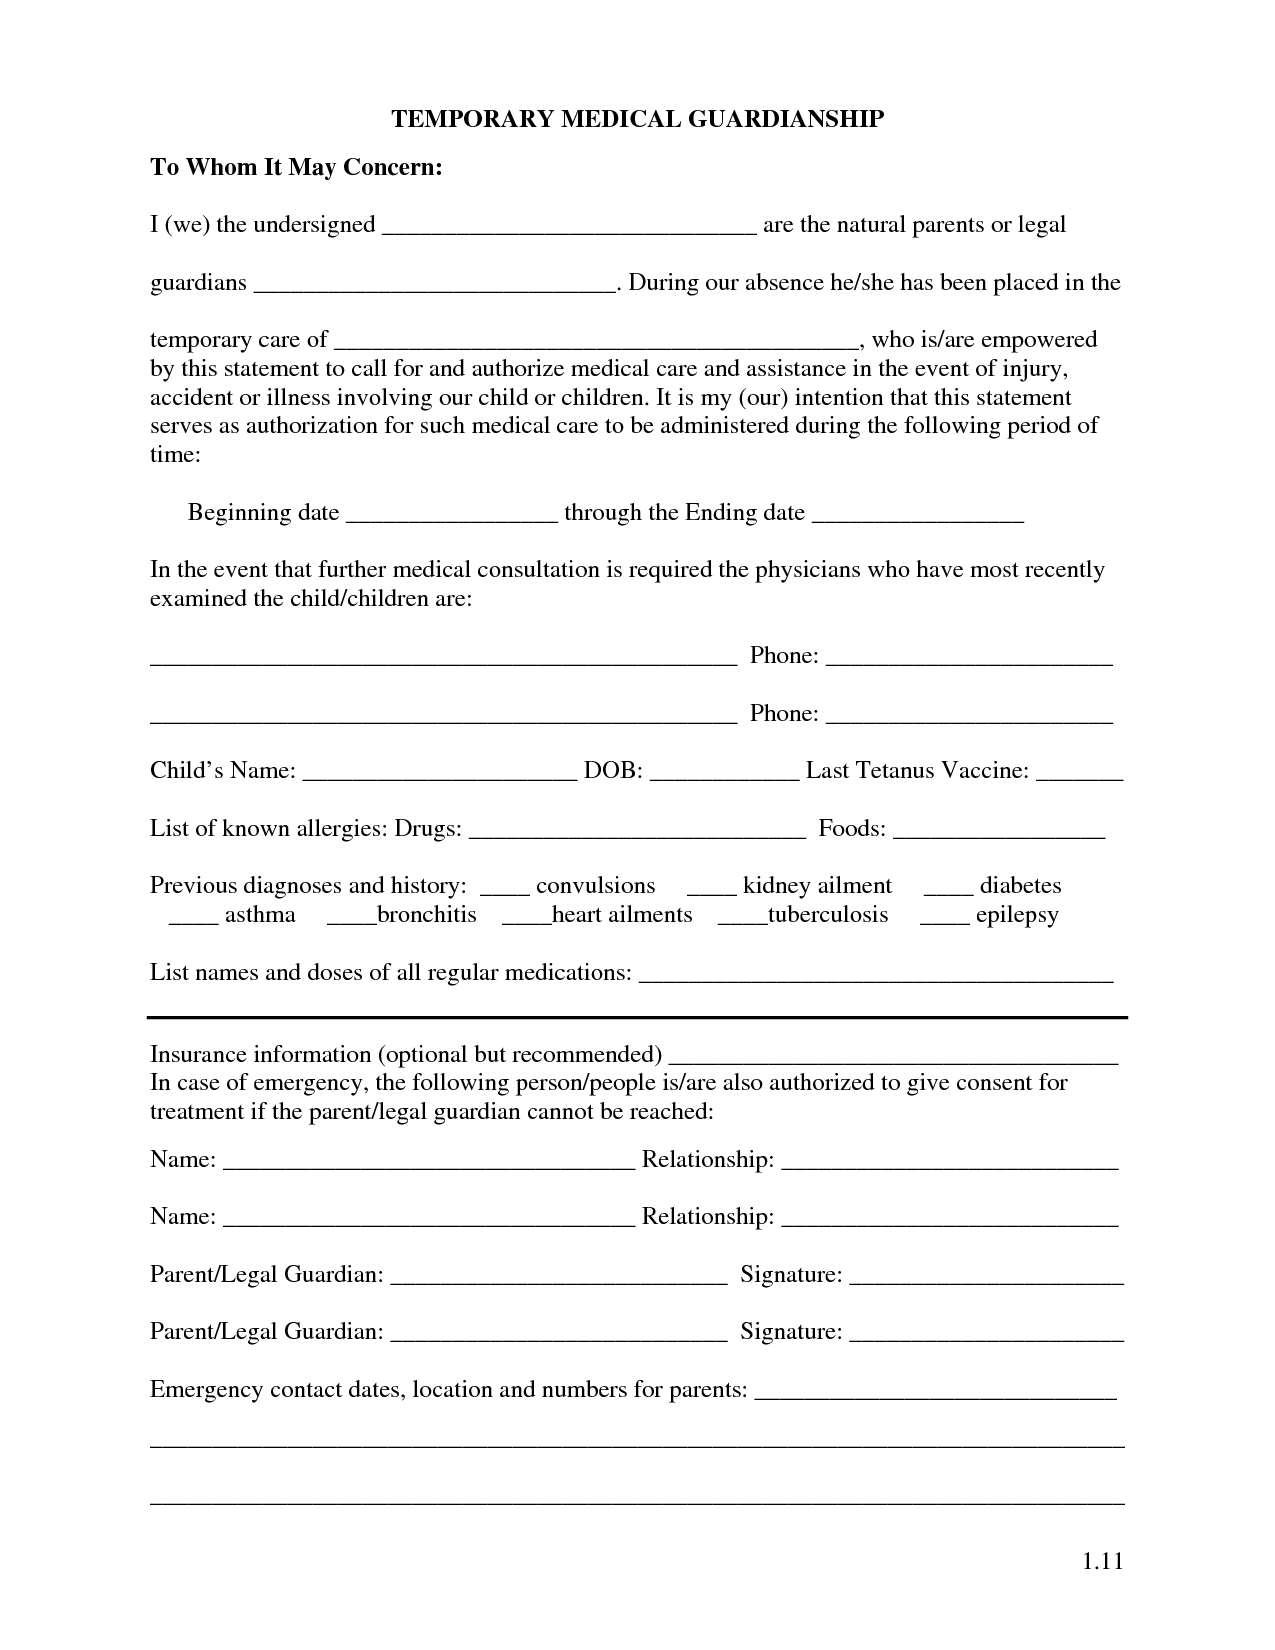 Free Printable Temporary Guardianship Forms | Forms | Child Custody - Free Printable Legal Guardianship Forms